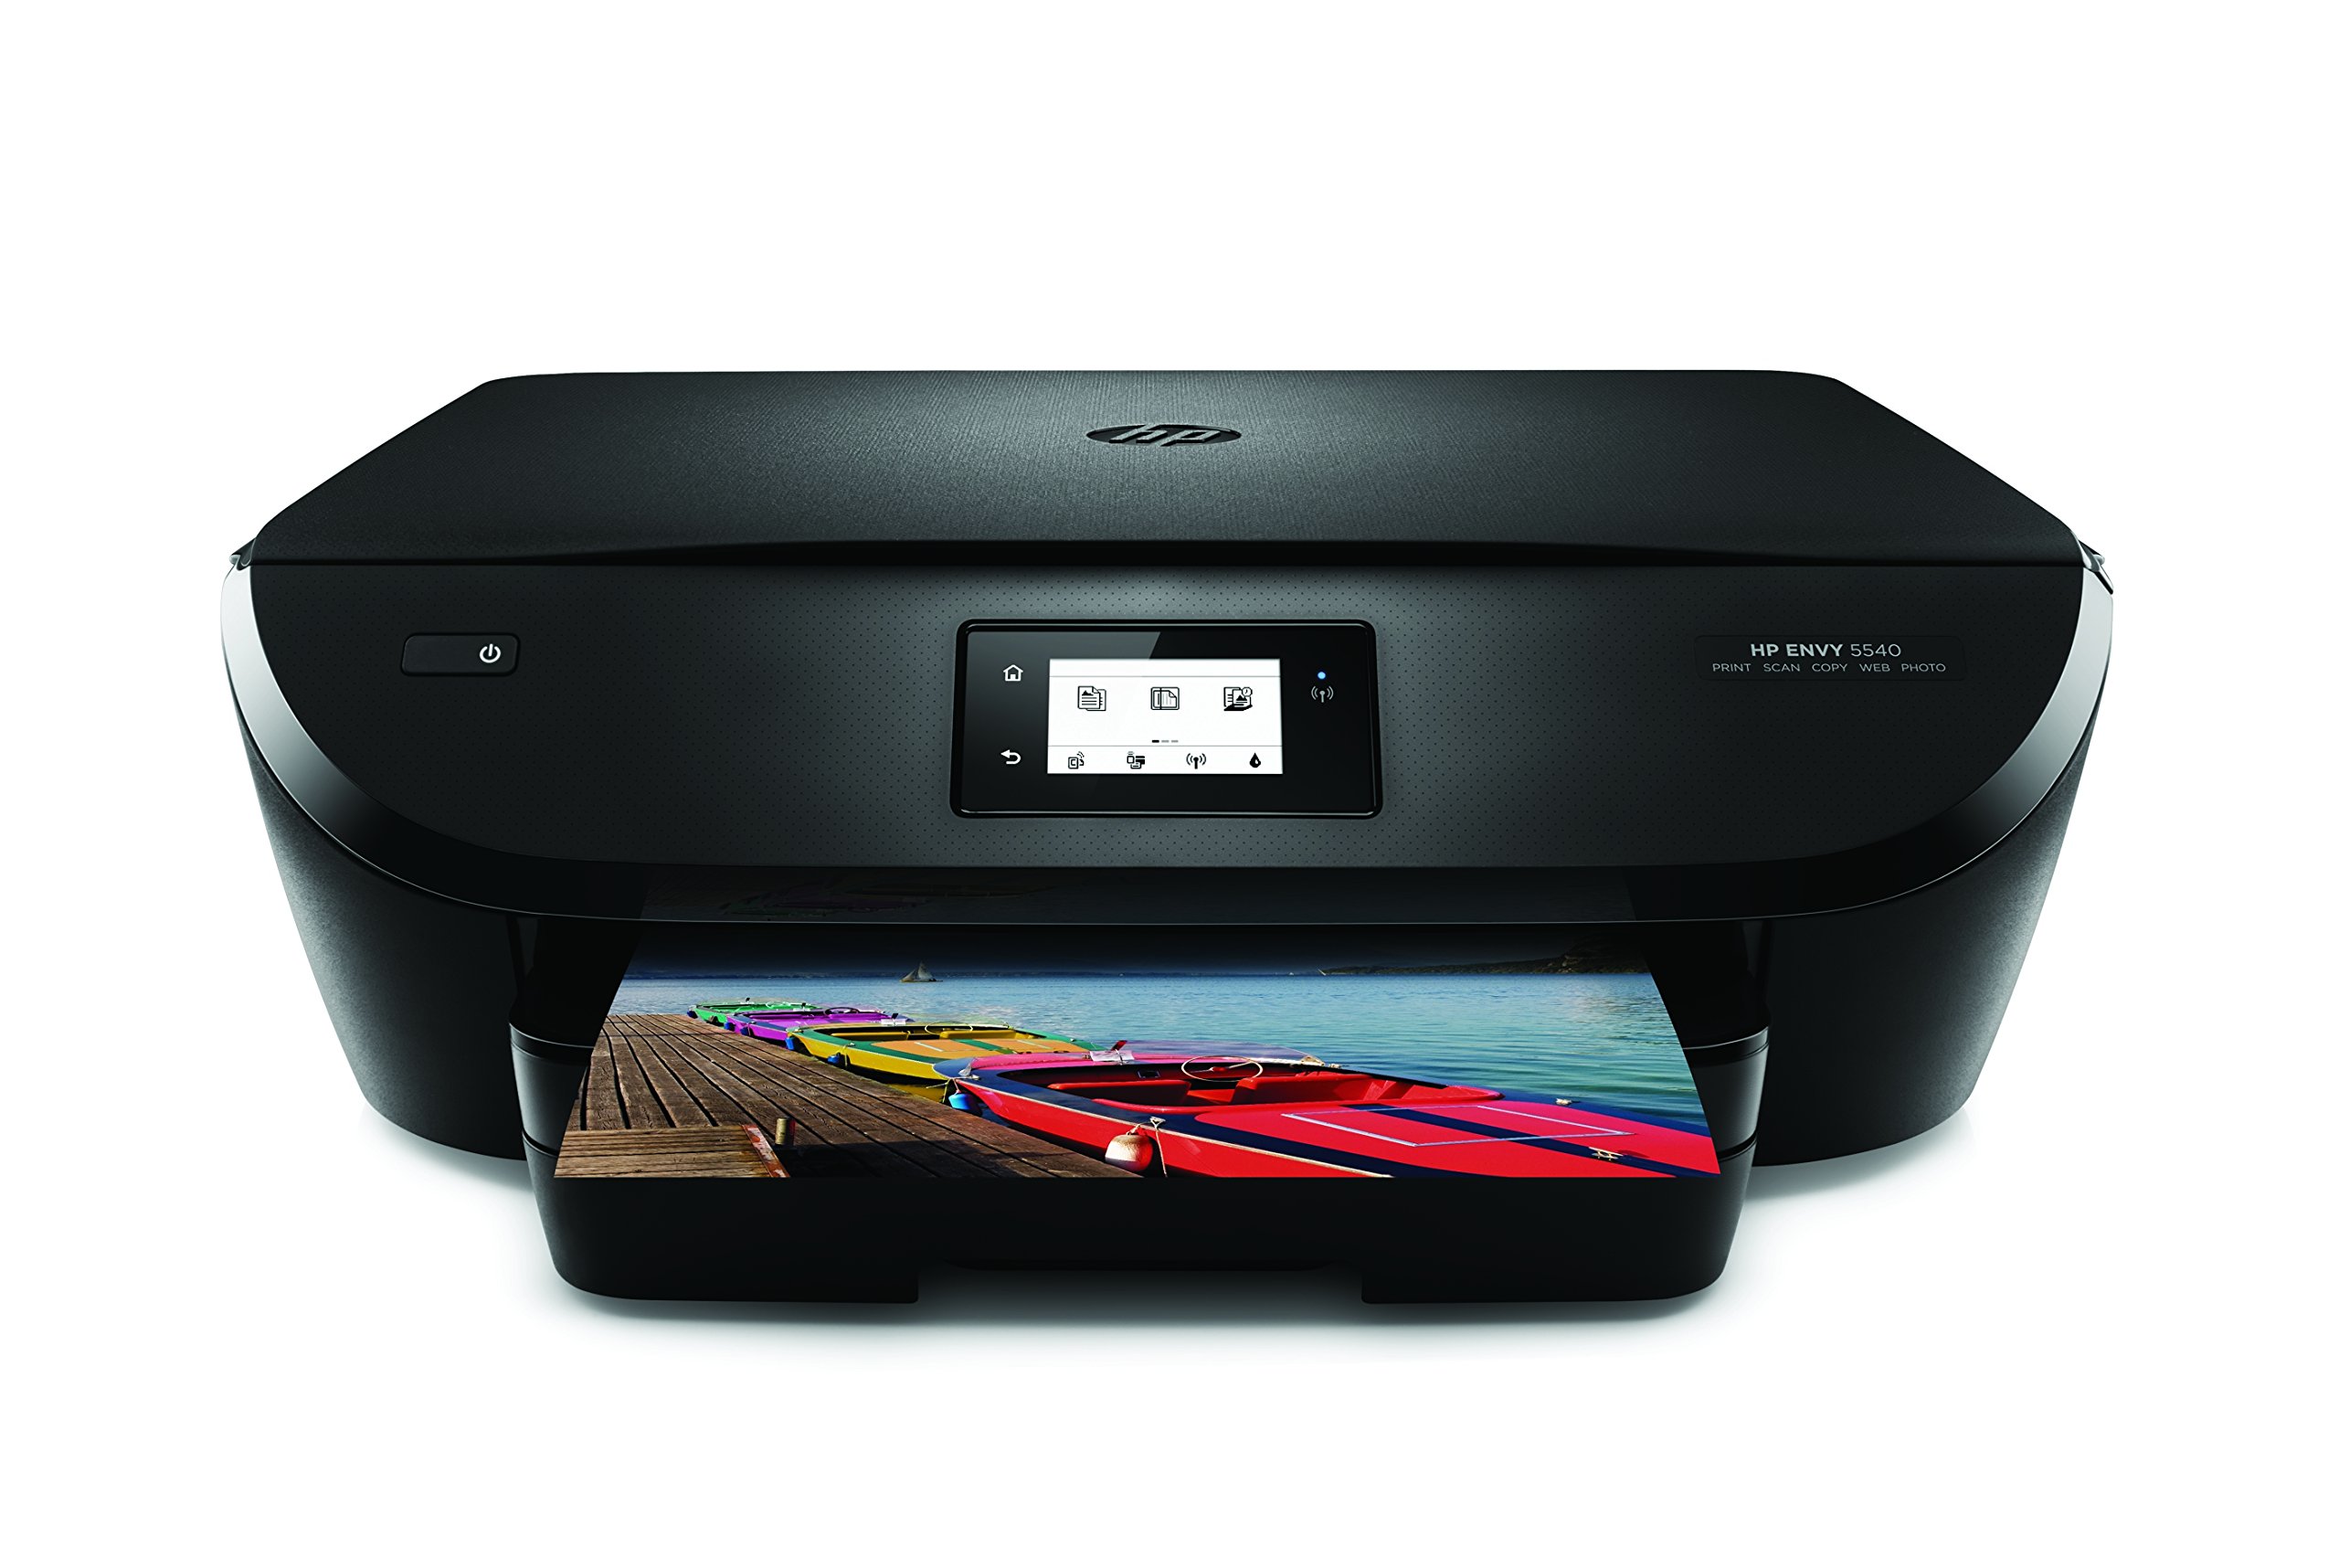 ENVY 5540 All-in-One Printer